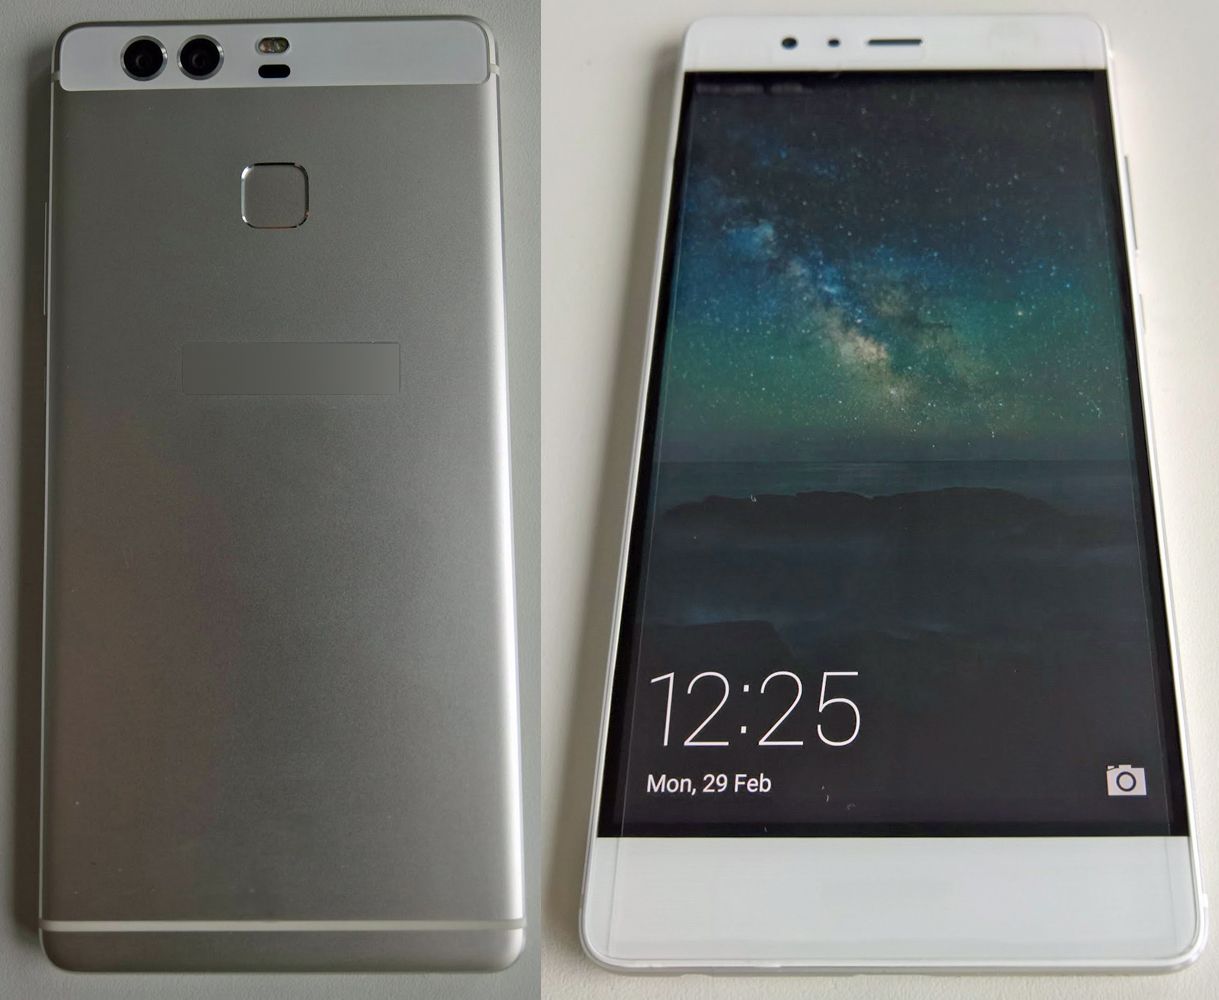 huawei p9 leak reveals phone s body and dual camera system image 1